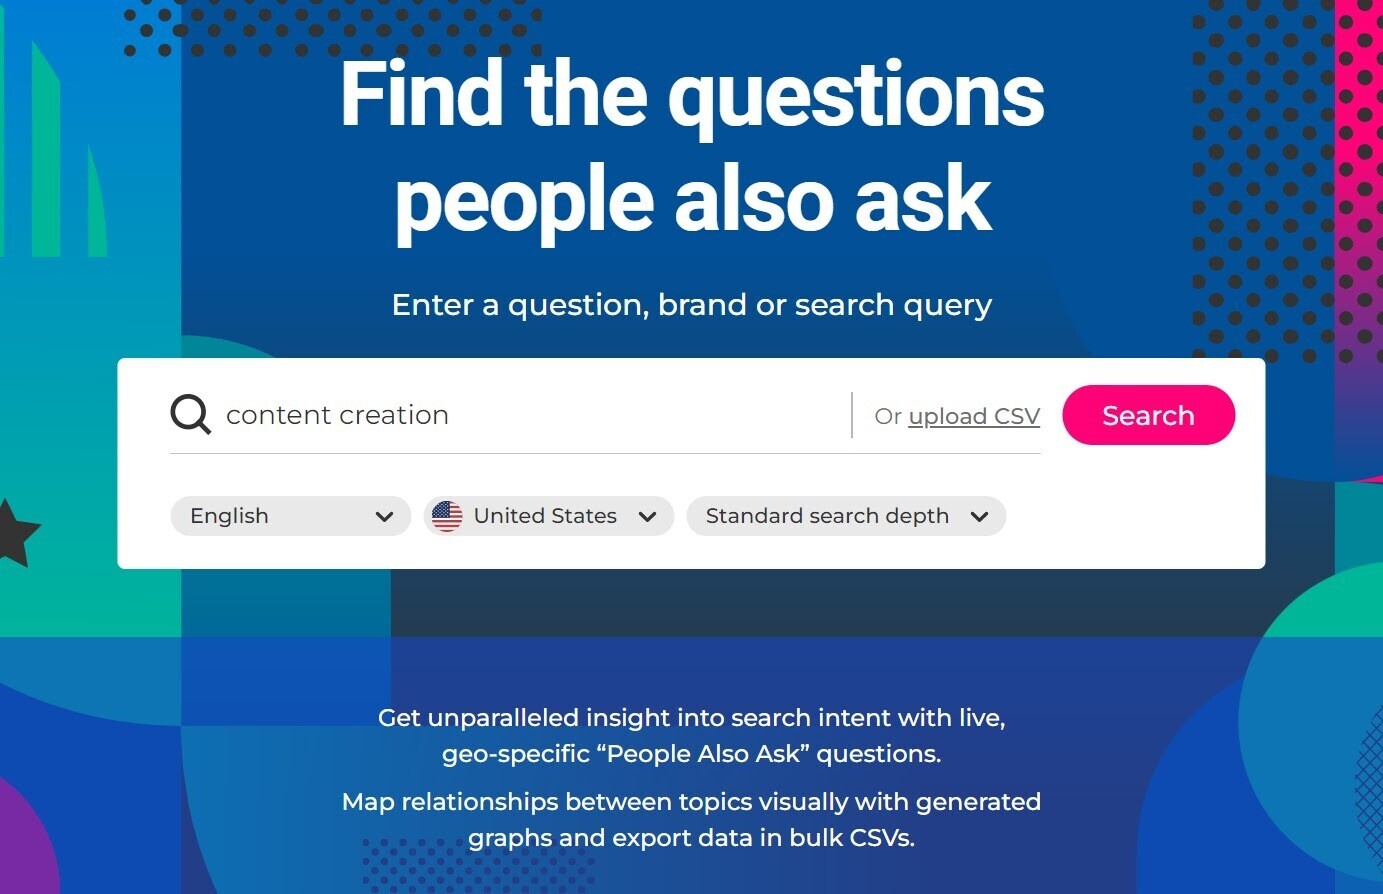 AlsoAsked homepage with title "Find the questions people also ask" and search bar